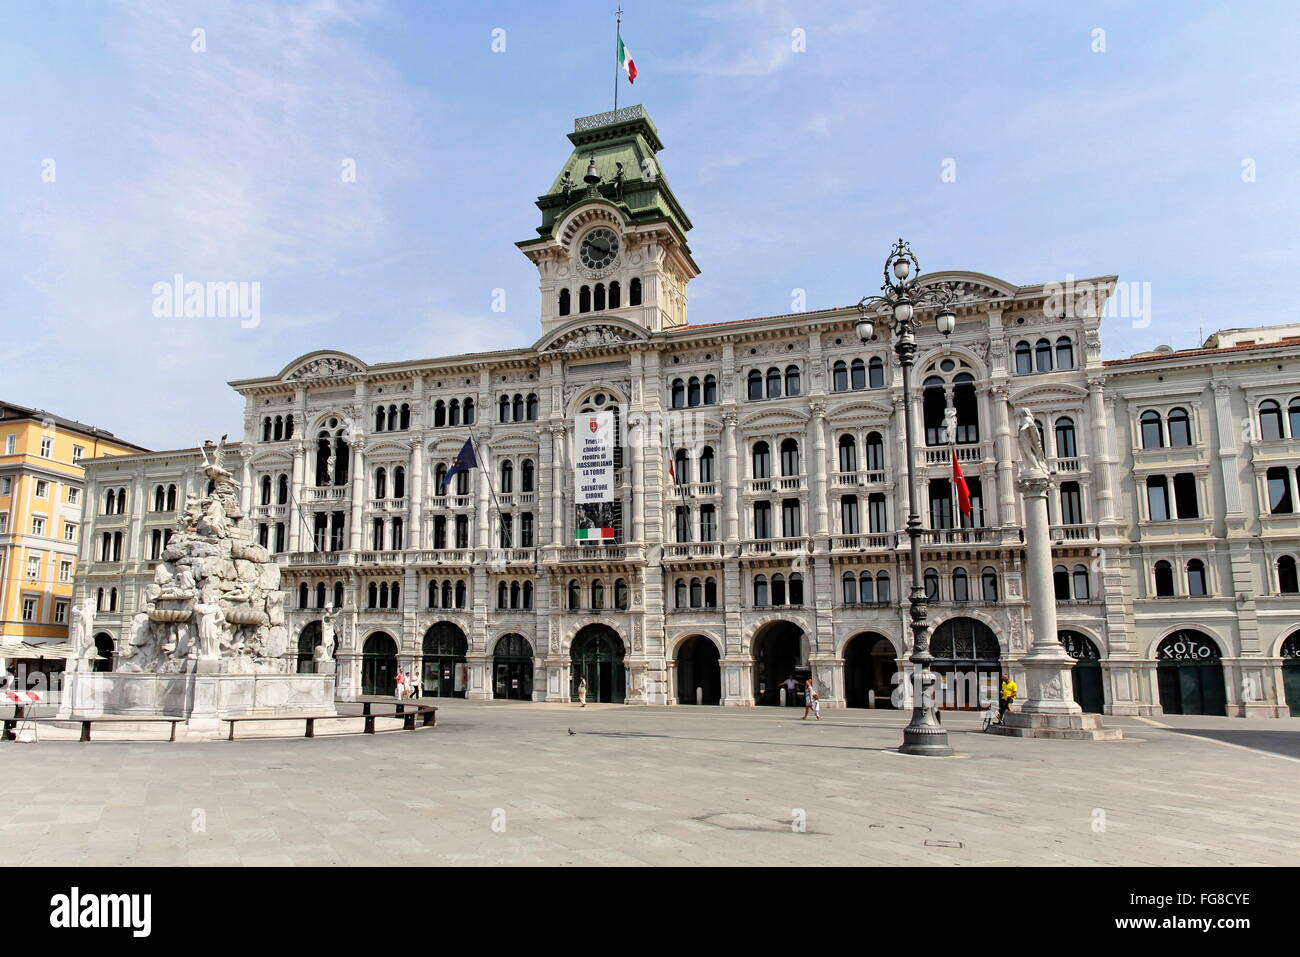 geography / travel, Italy, Friuli, Trieste, city hall), built: 1872 - 1875 by Giuseppe Bruni, fountain of the four continents, built: 1750 by Giovanni Mazzoleni, Piazza Unita, Additional-Rights-Clearance-Info-Not-Available Stock Photo